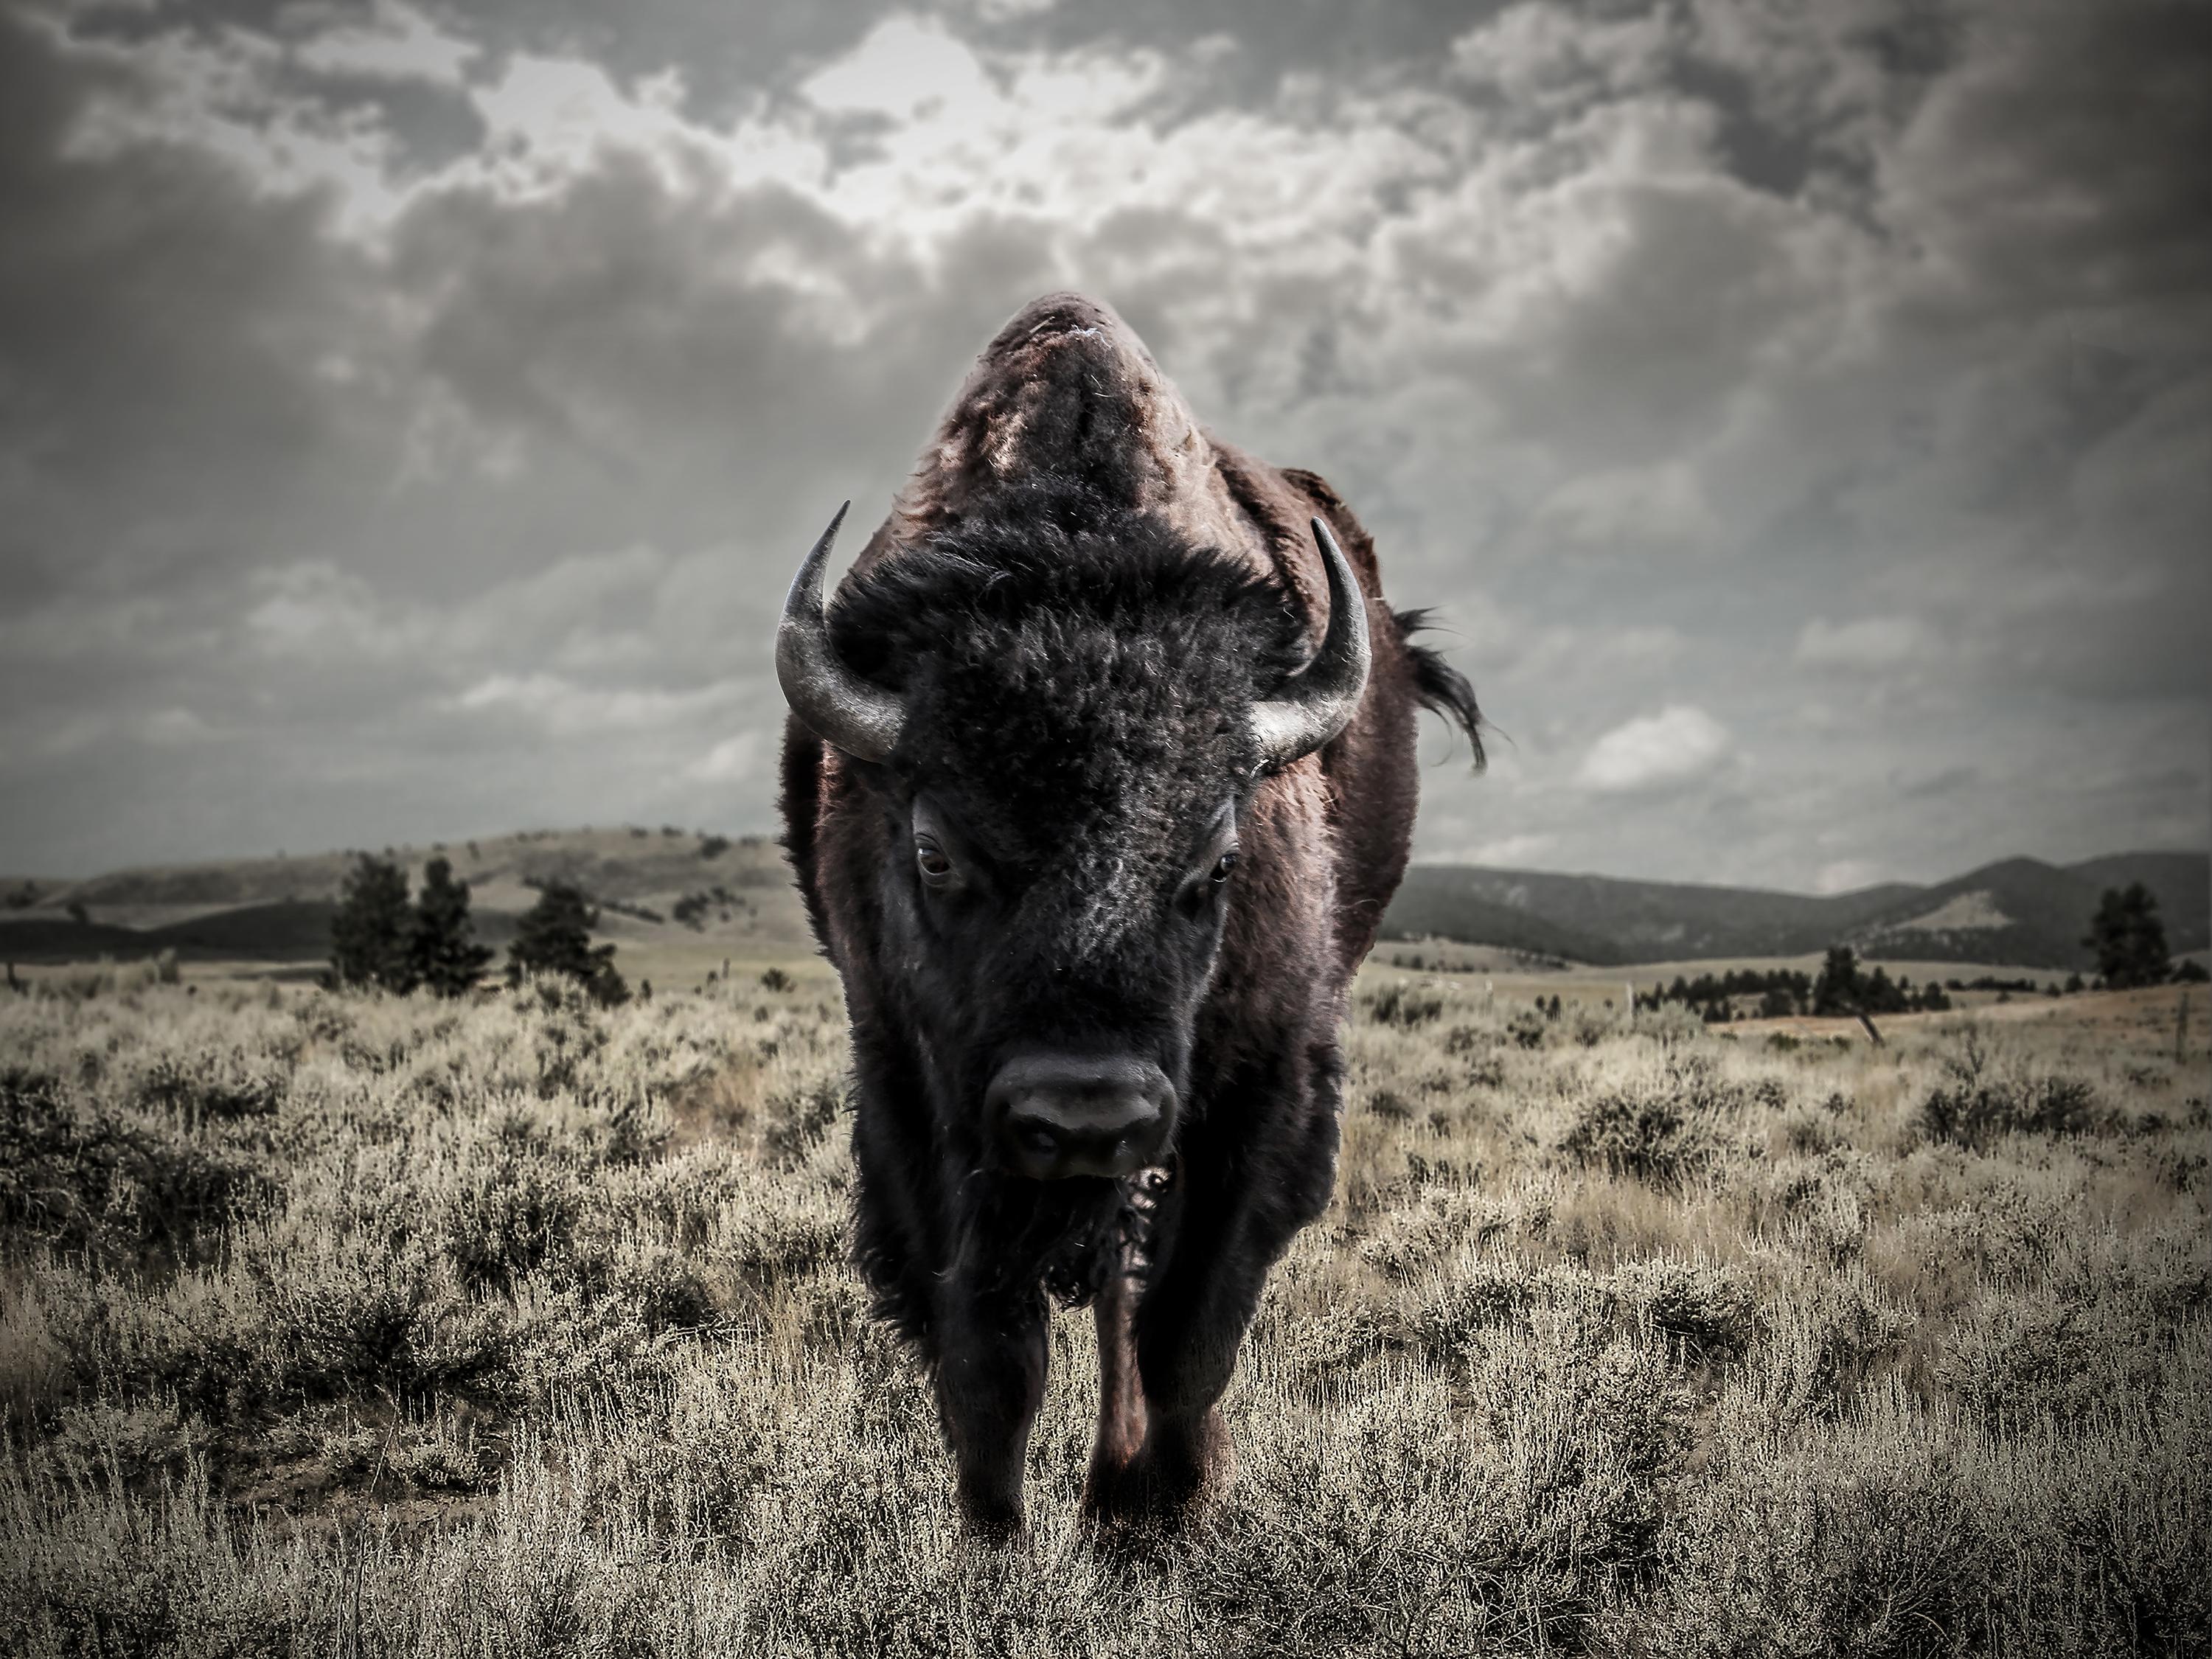 Shane Russeck Black and White Photograph - "Bison" 24x36 - Photograph, Bison Photography Unsigned Print Buffalo Western Art